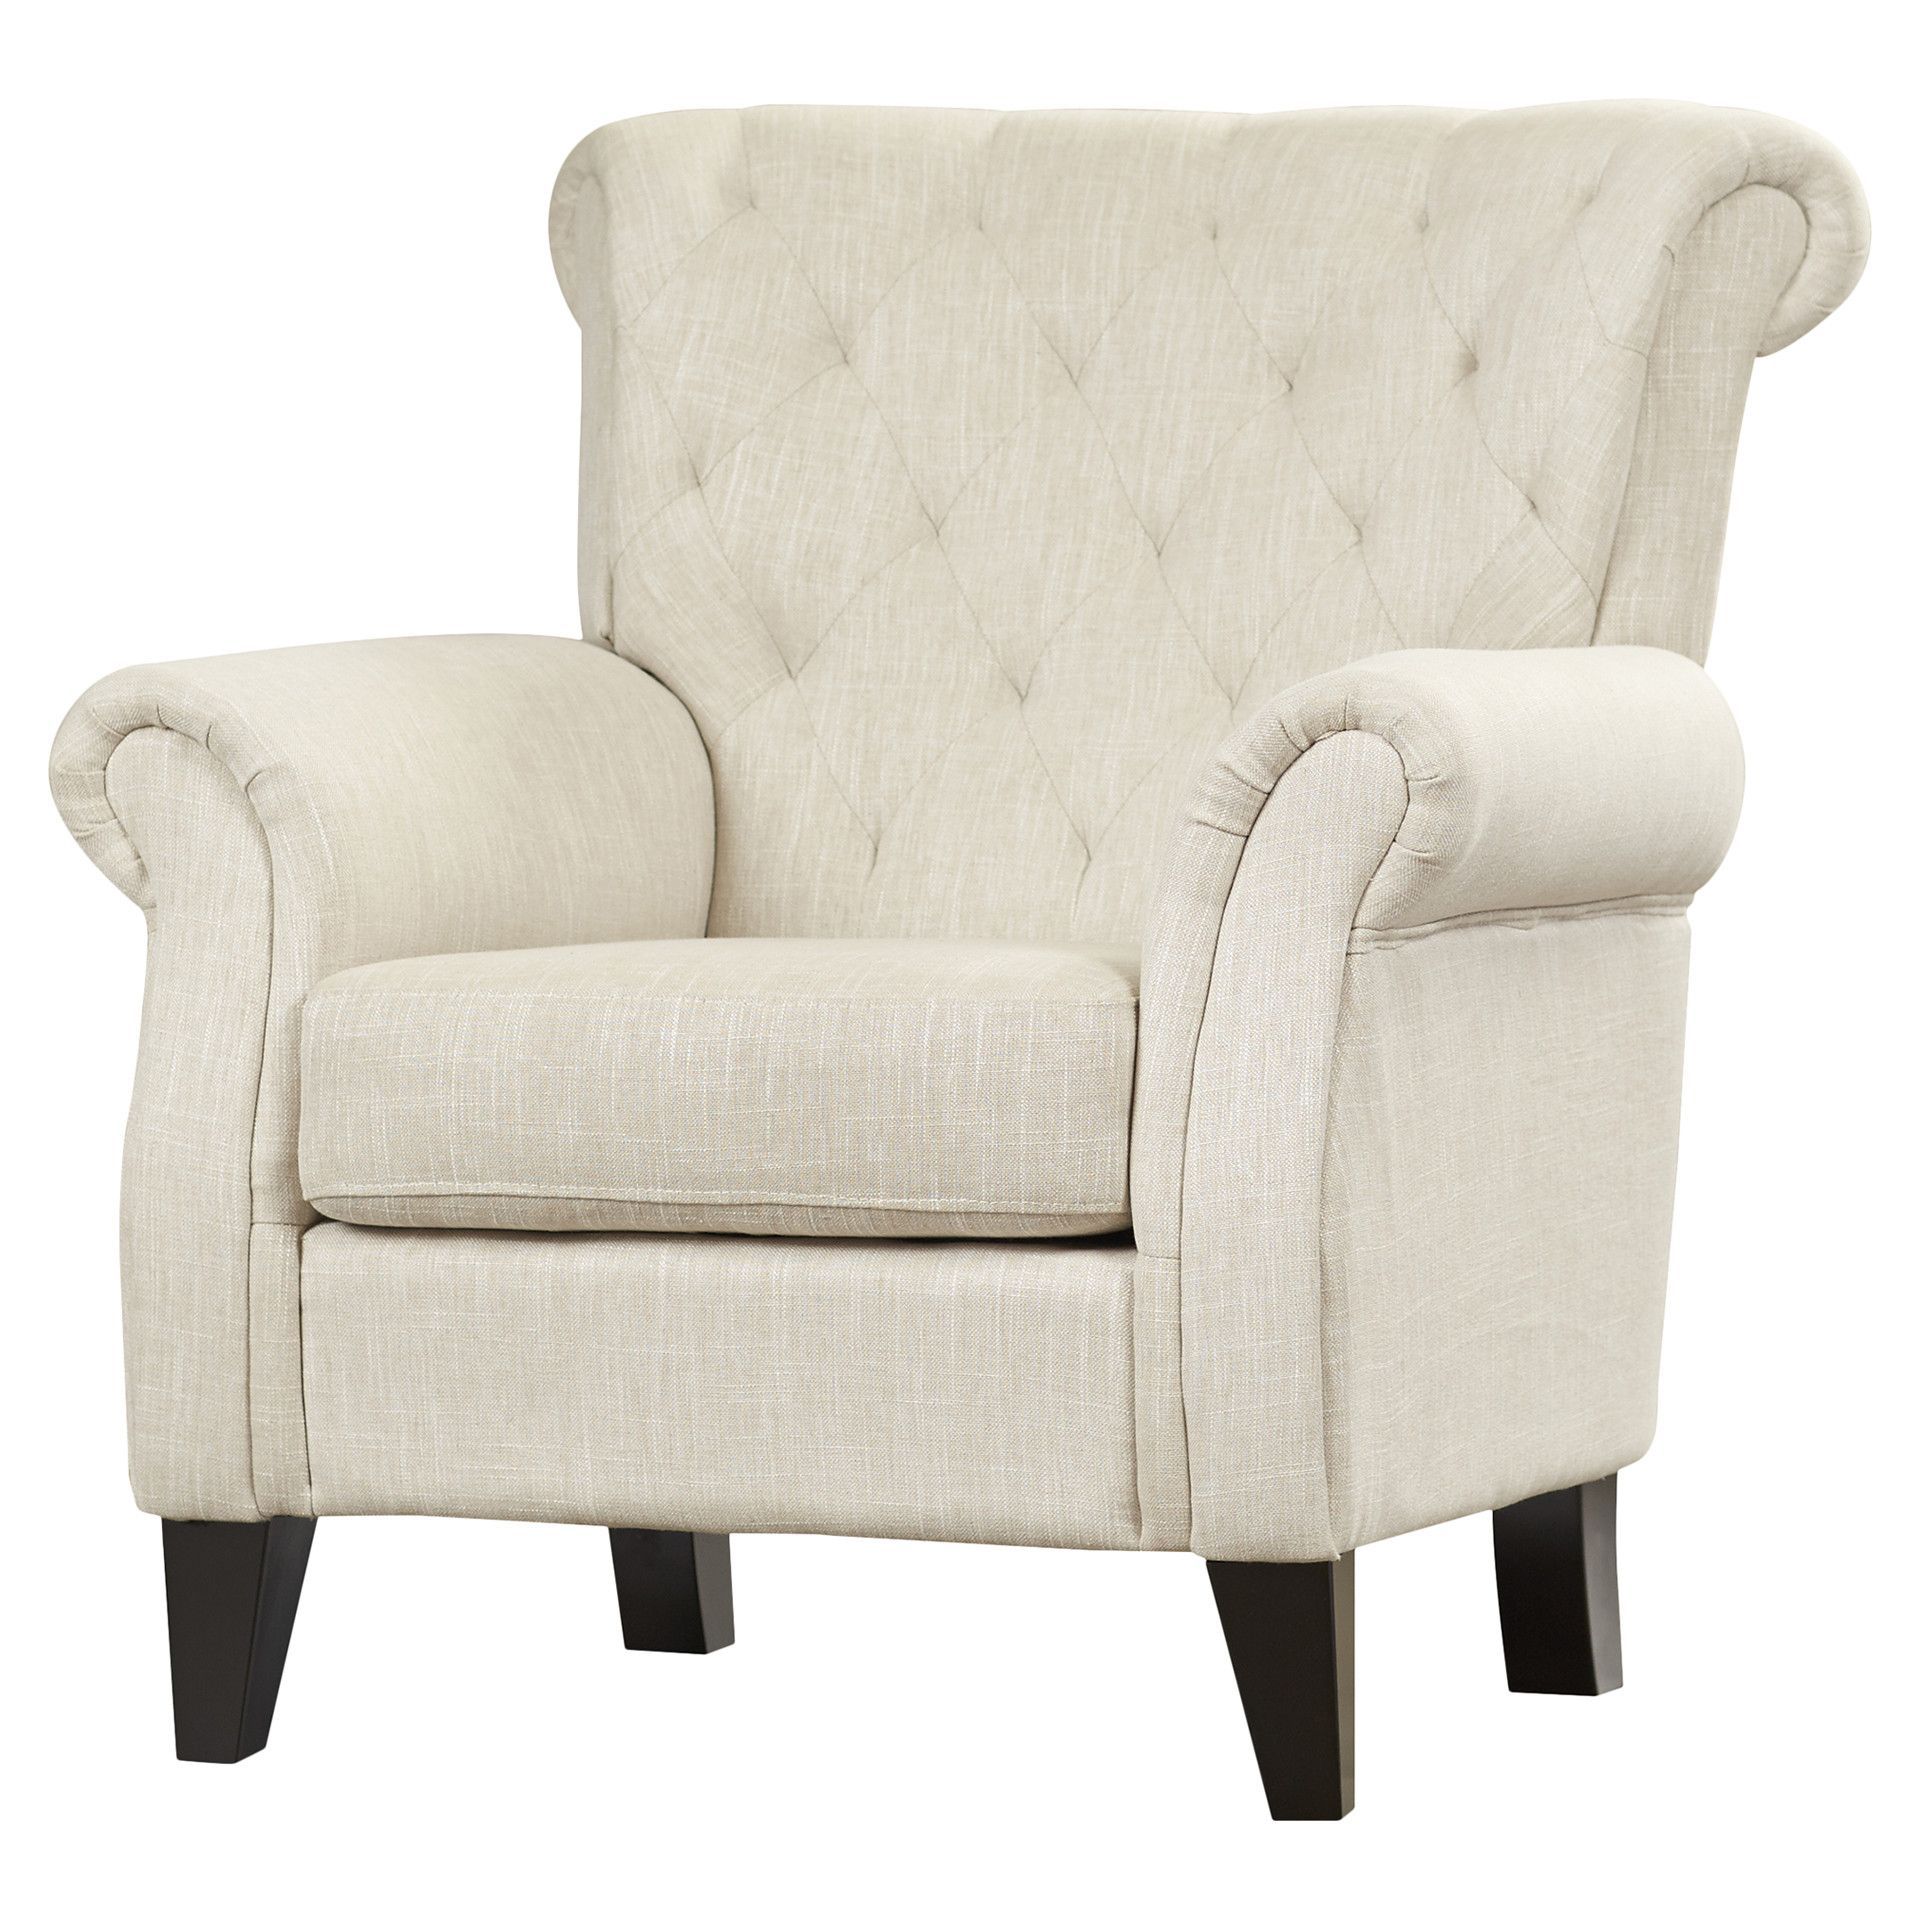 Customer Image Zoomed | Tufted Accent Chair, Furniture Throughout Louisburg Armchairs (View 6 of 15)